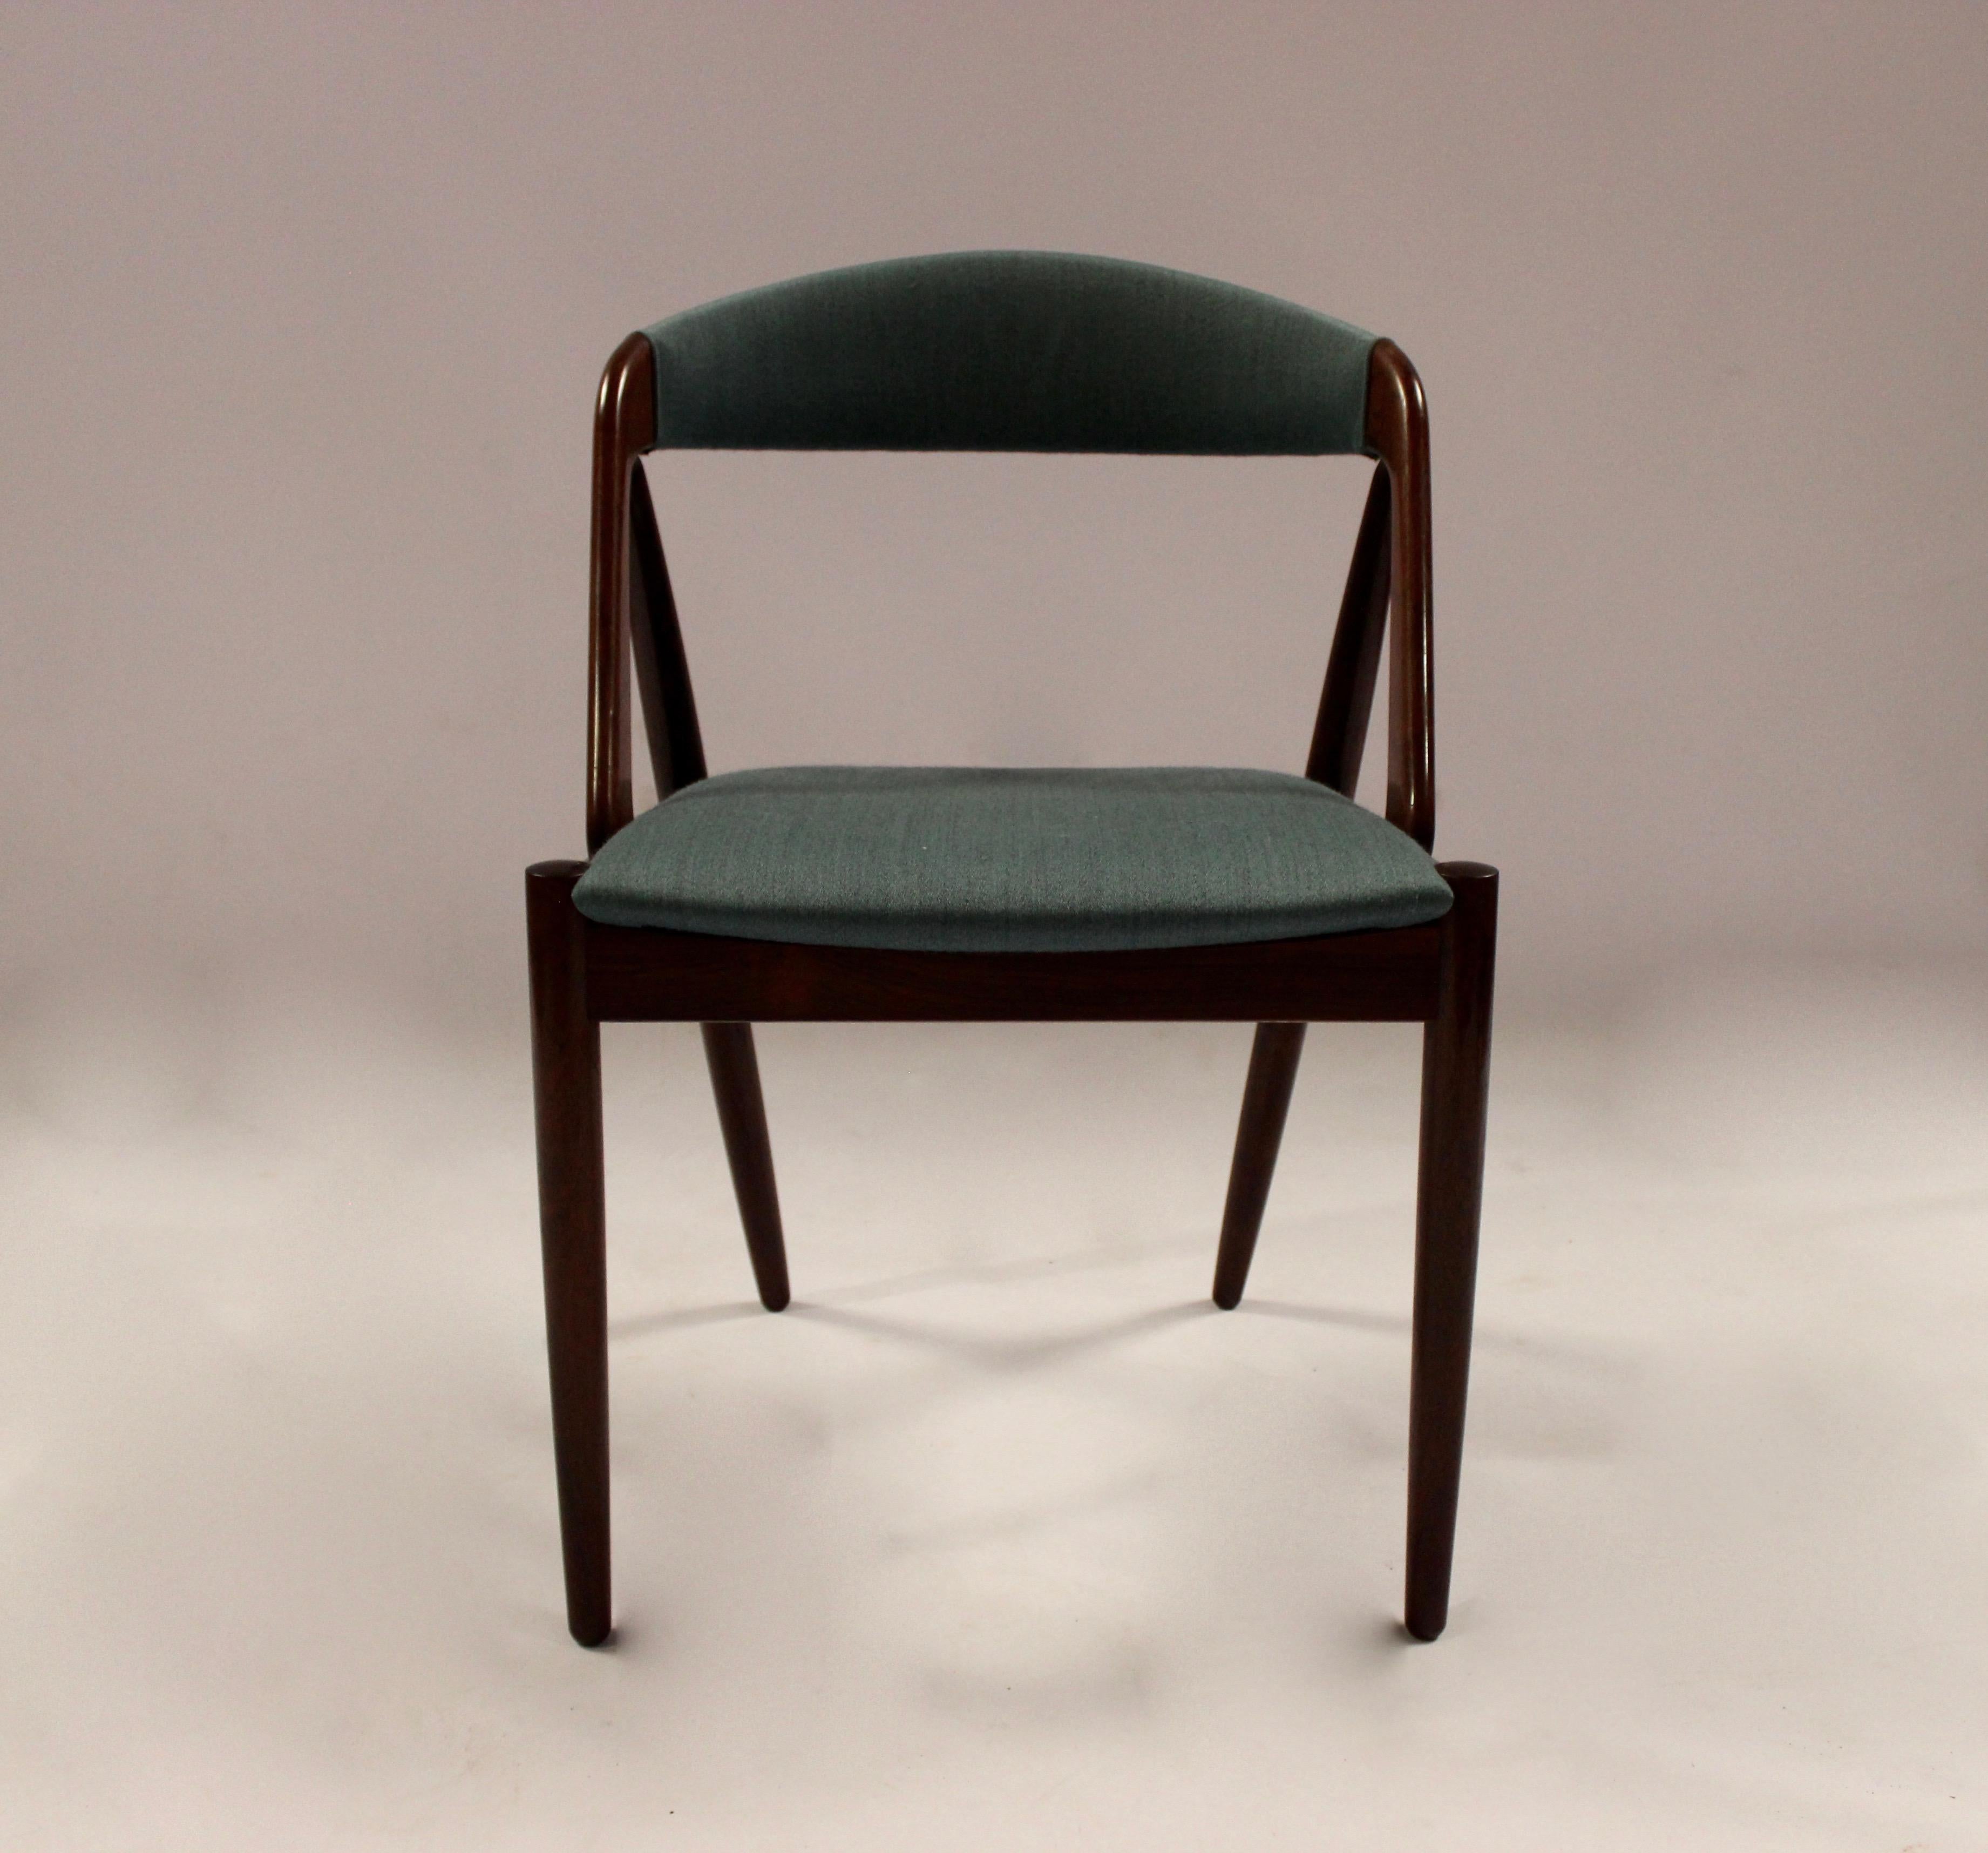 A set of four dining room chairs, model 31, designed by Kai Kristiansen in 1956 and manufactured by Schou Andersen in the 1960s. The chairs are of rosewood and upholstered in turquoise fabric.